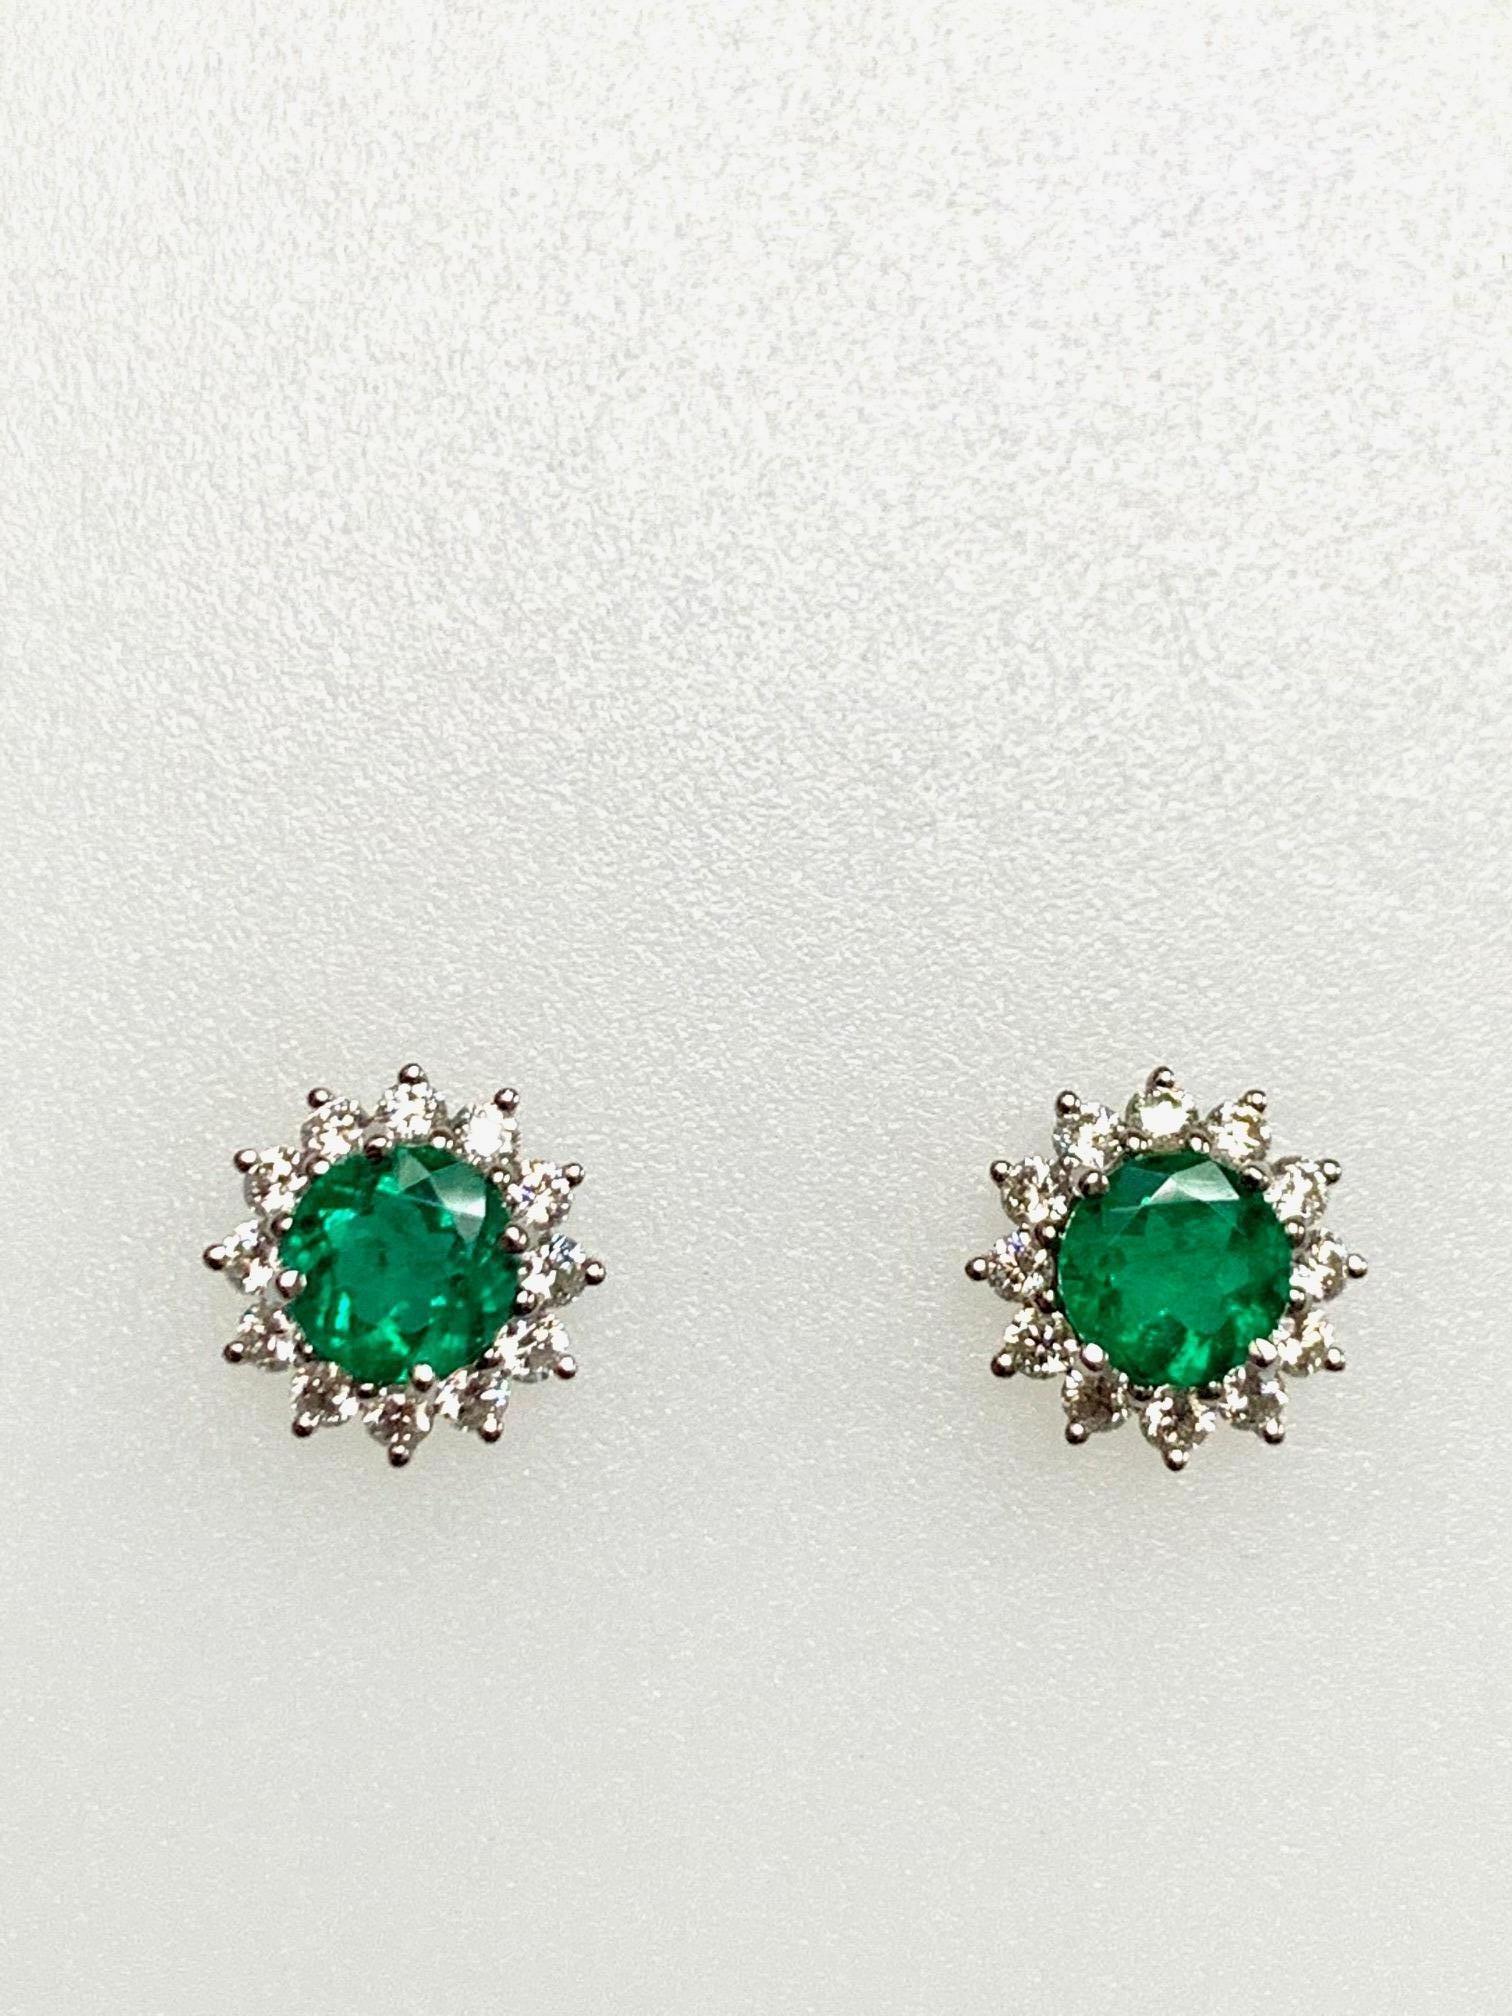 1.29 Carat zambian emerald round shape set in classic 18k white gold earrings with 0.62 carat diamonds , g-h si1, around it .